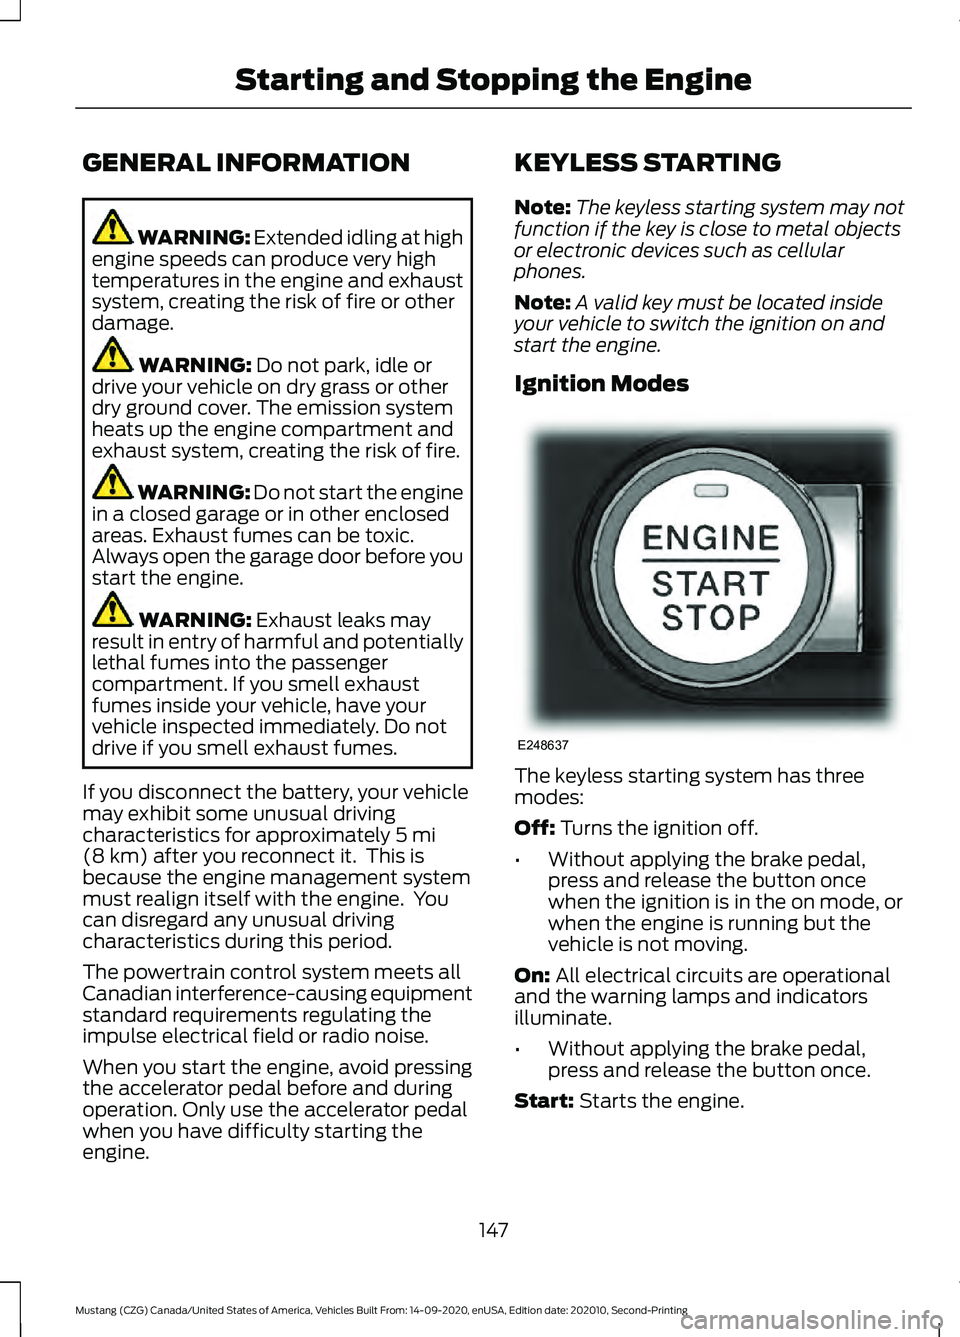 FORD MUSTANG 2021  Owners Manual GENERAL INFORMATION
WARNING: Extended idling at high
engine speeds can produce very high
temperatures in the engine and exhaust
system, creating the risk of fire or other
damage. WARNING: 
Do not park